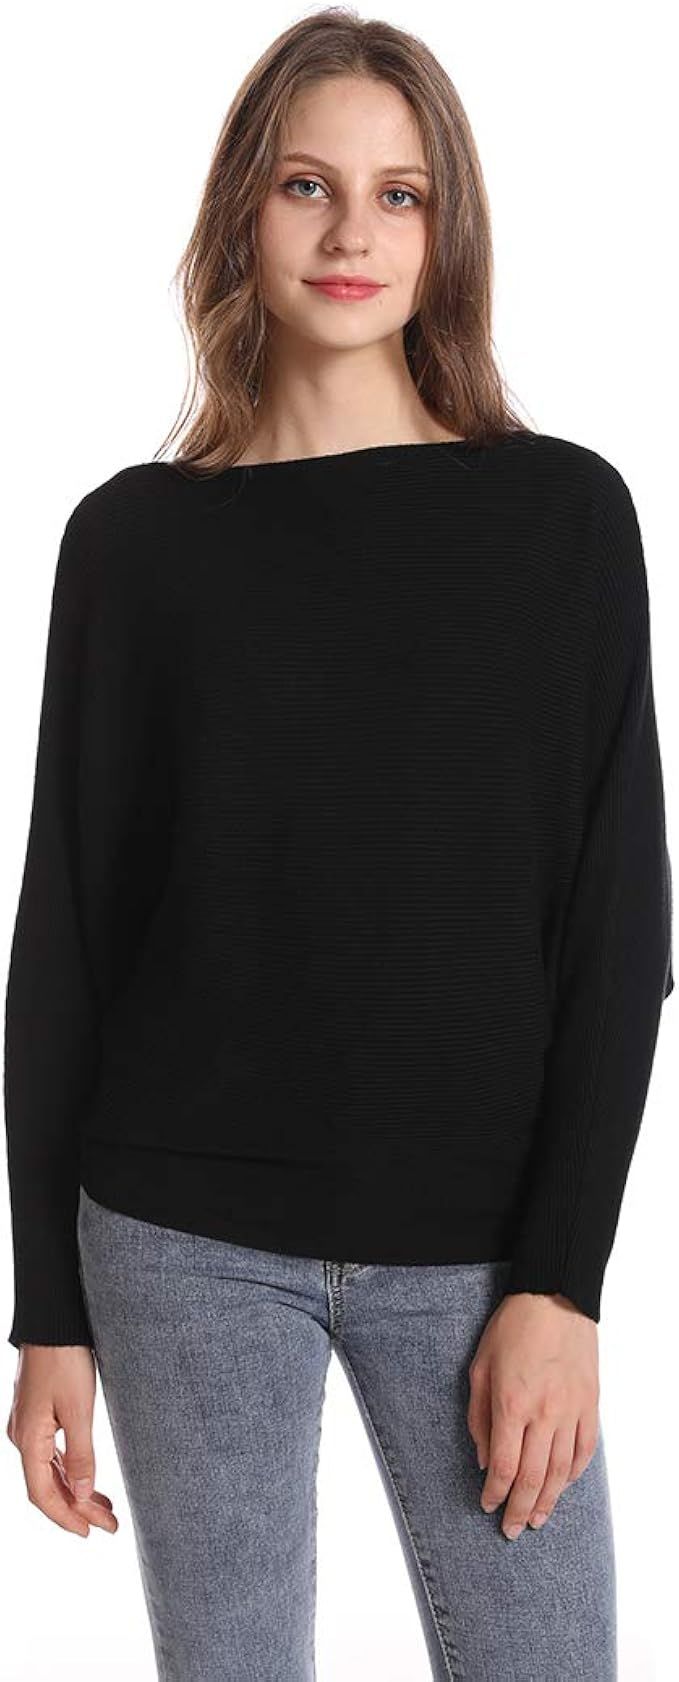 Women's Batwing Sleeves Sweater Solid Boat Neck Knit Pullover Dolman Sweater Tops for Women | Amazon (US)